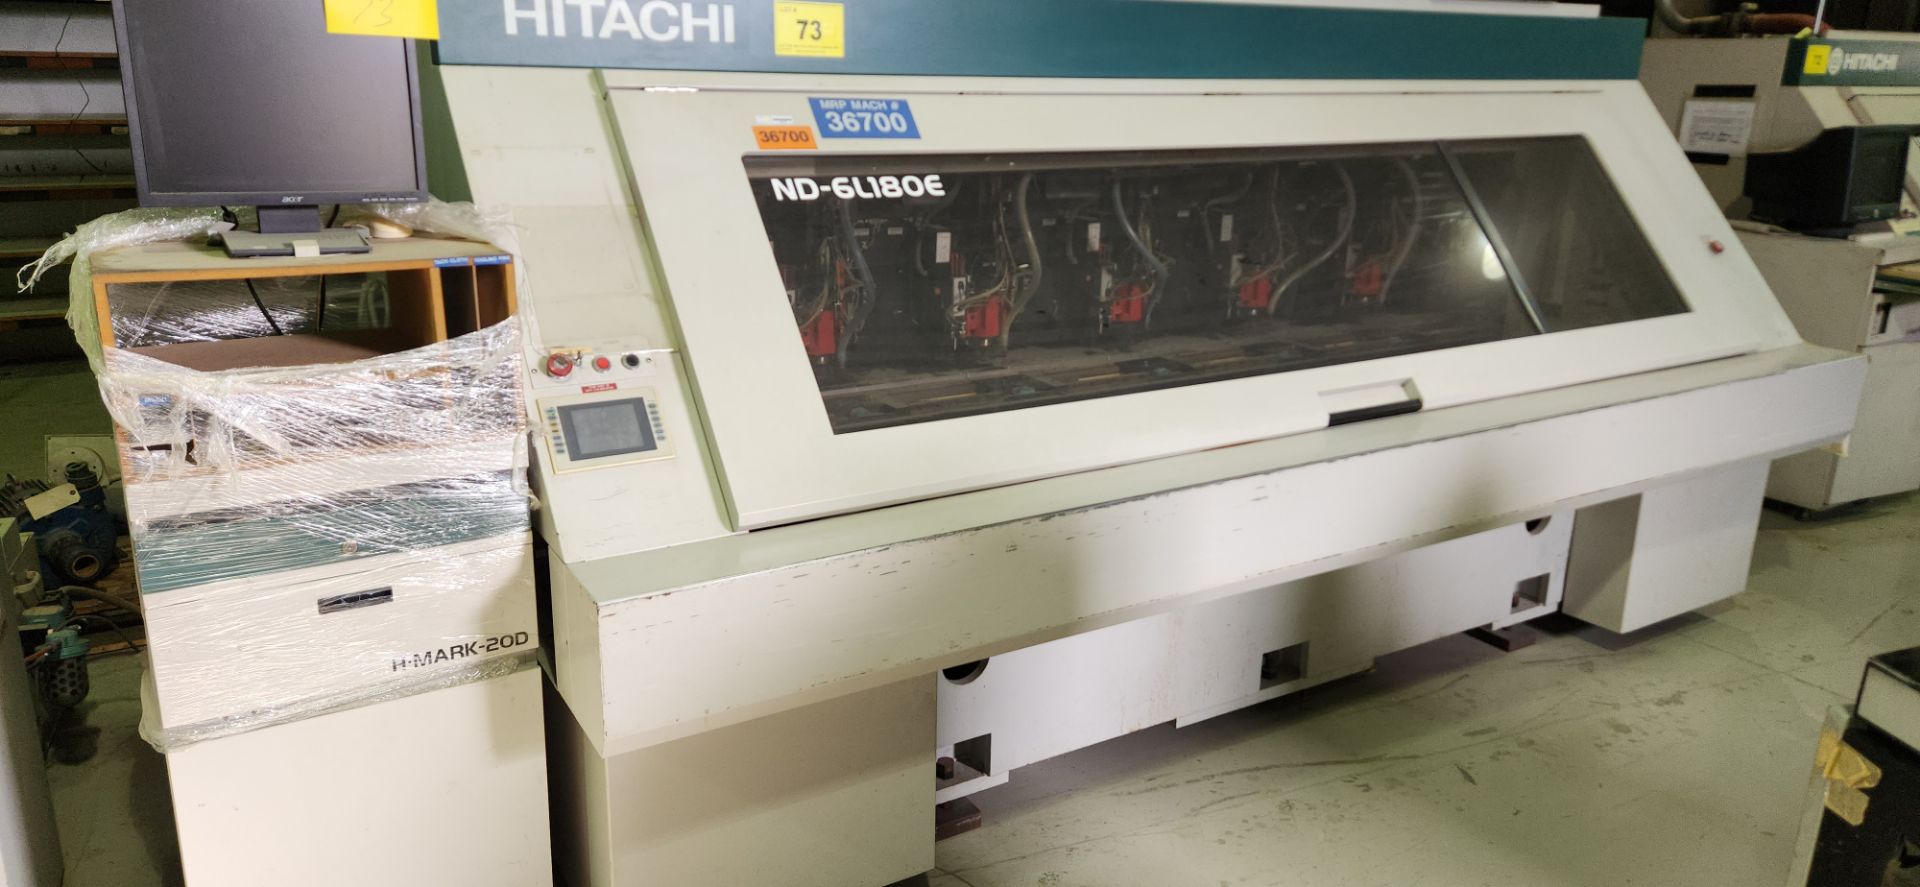 2000 HITACHI MODEL ND-6L180E CNC DRILLING MACHINE, SPEEDS TO 120,000 RPM, APPROX. 10,000 HOLES/HR, - Image 4 of 10